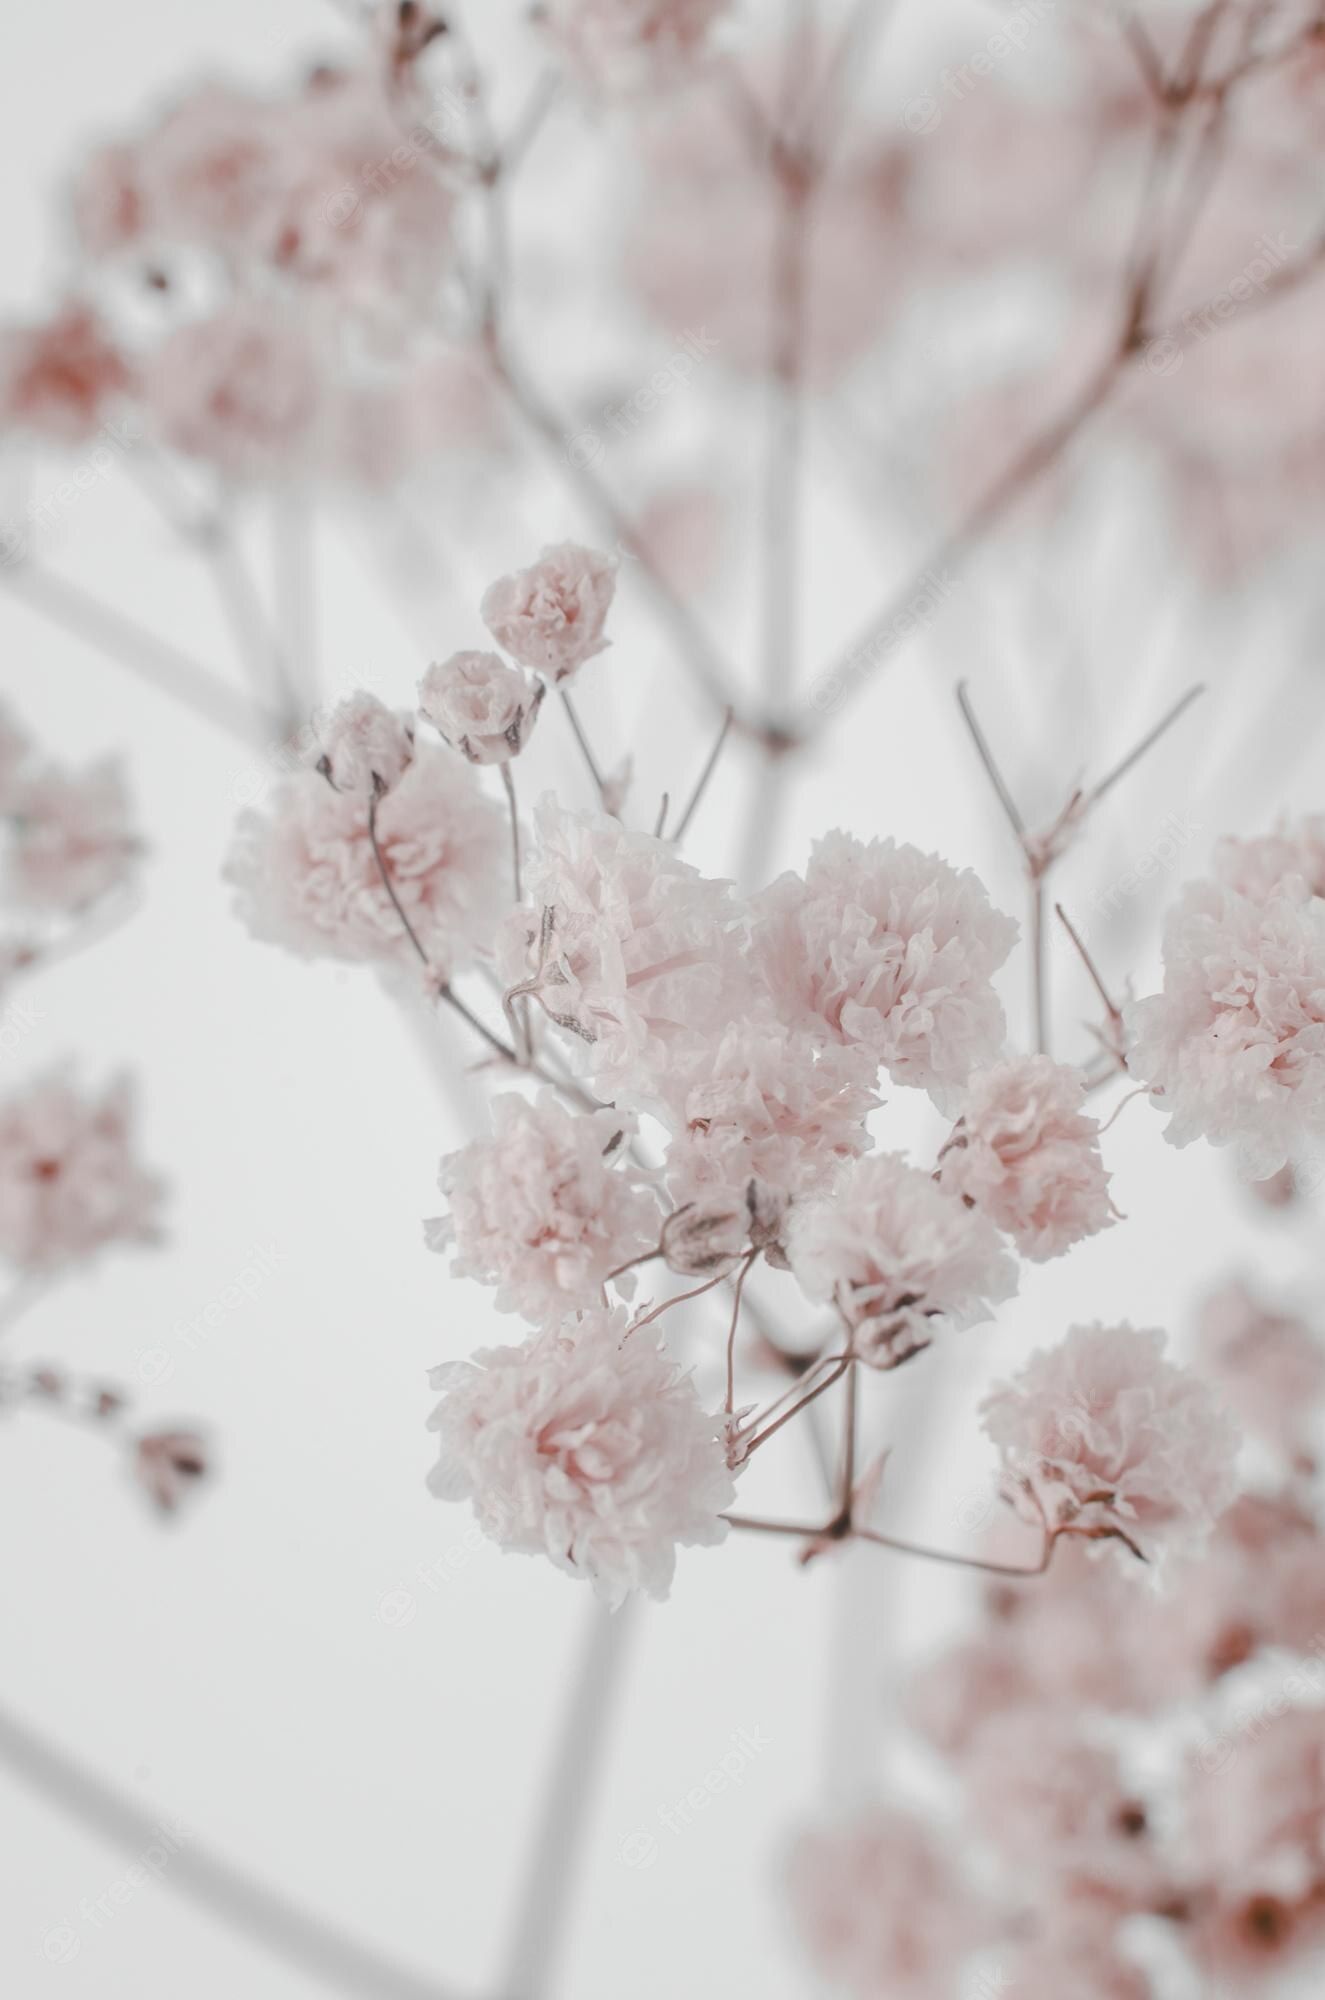 A bunch of baby's breath flowers on a white background - Blush